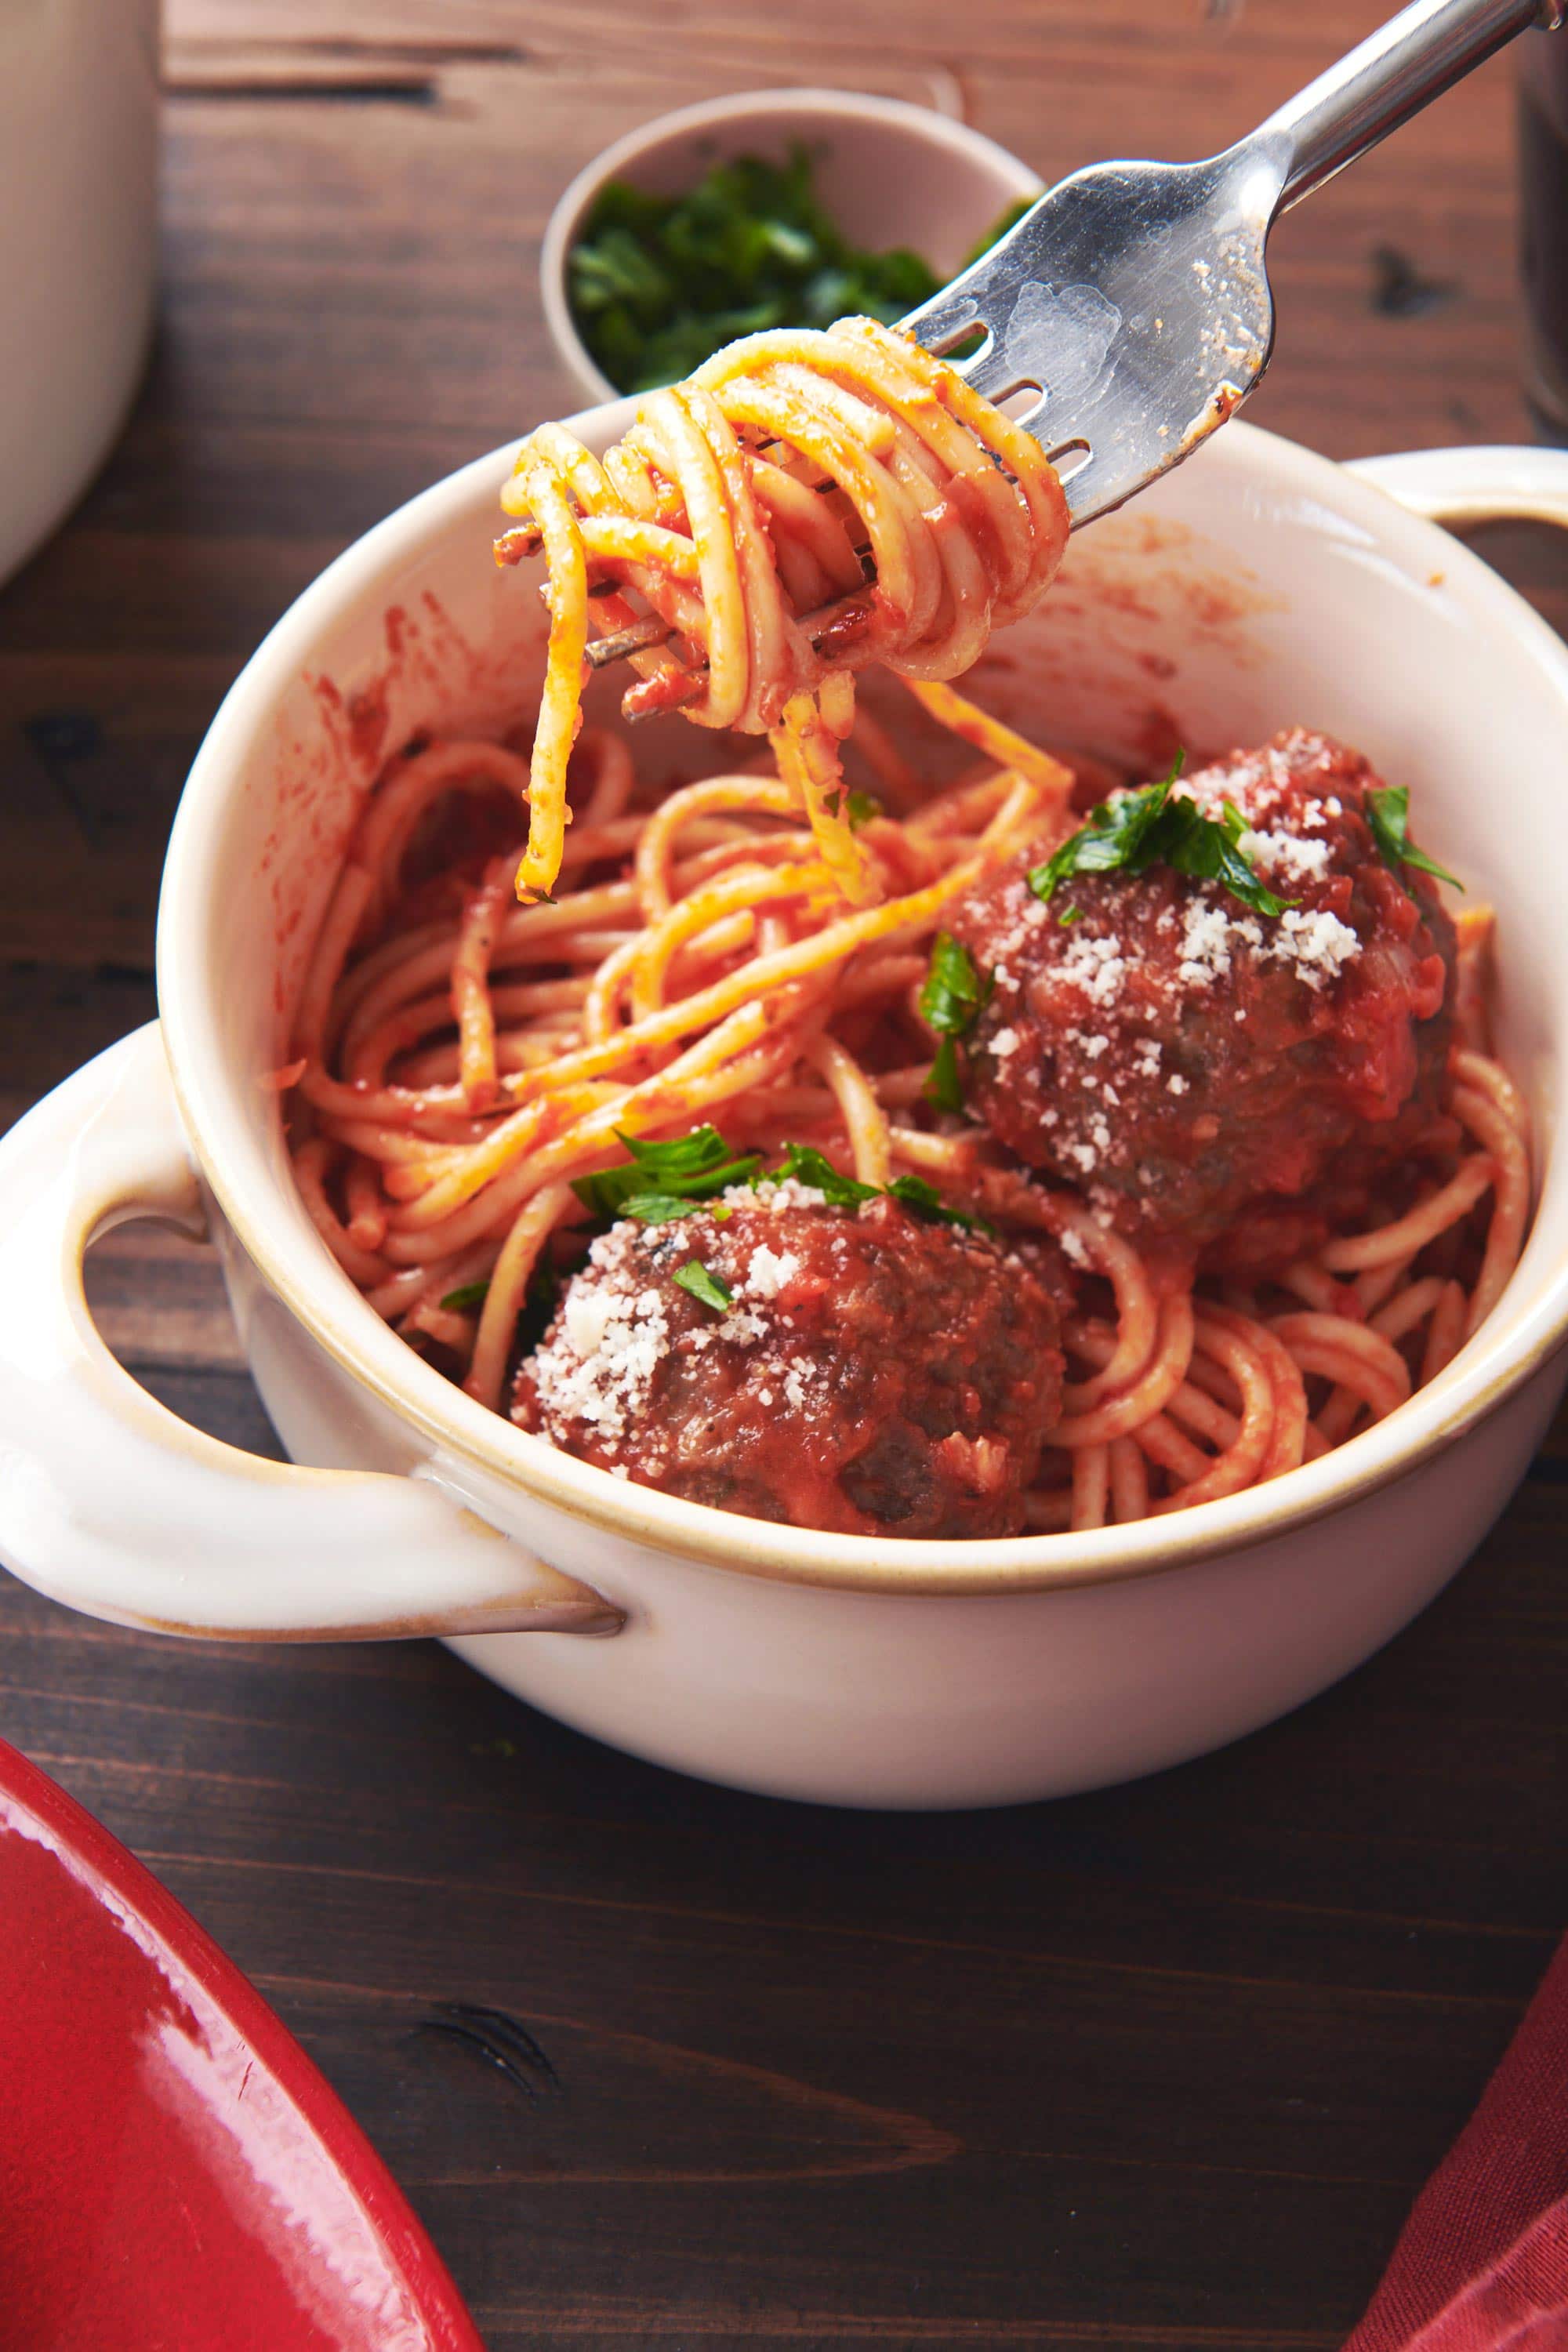 Fork grabbing noodles from a bowl of Spaghetti and Meatballs with Tomato Sauce.